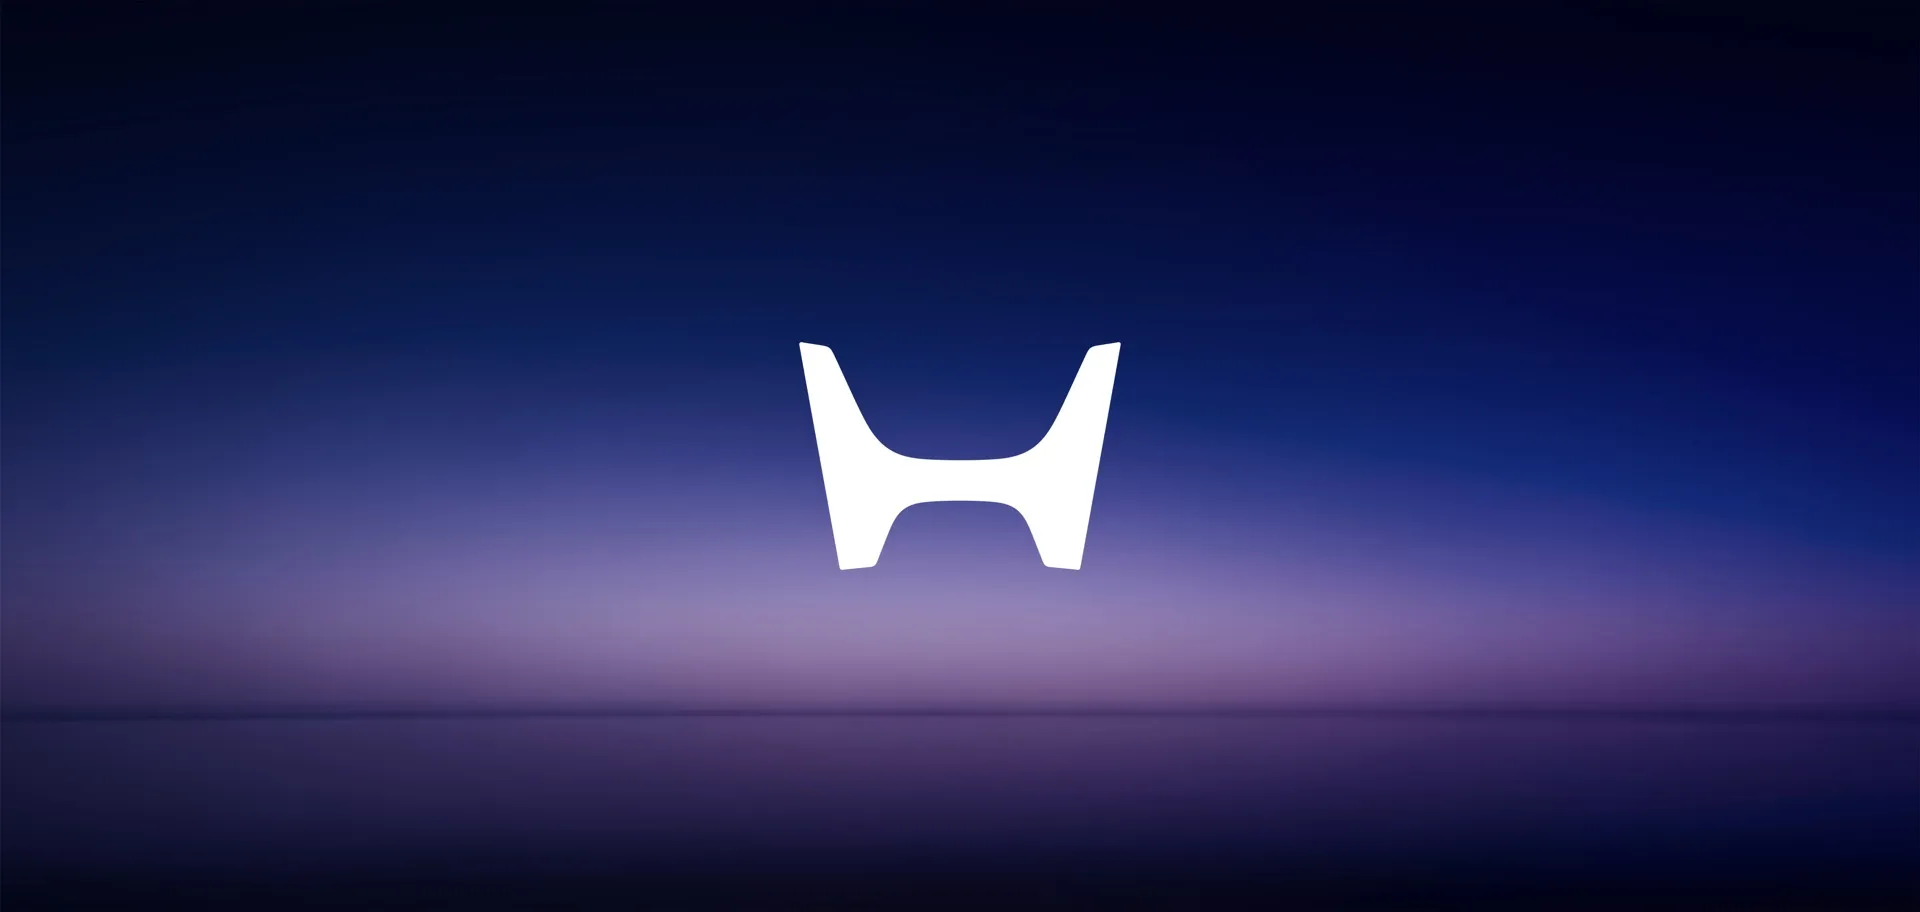 Honda's revised H logo for electric vehicles